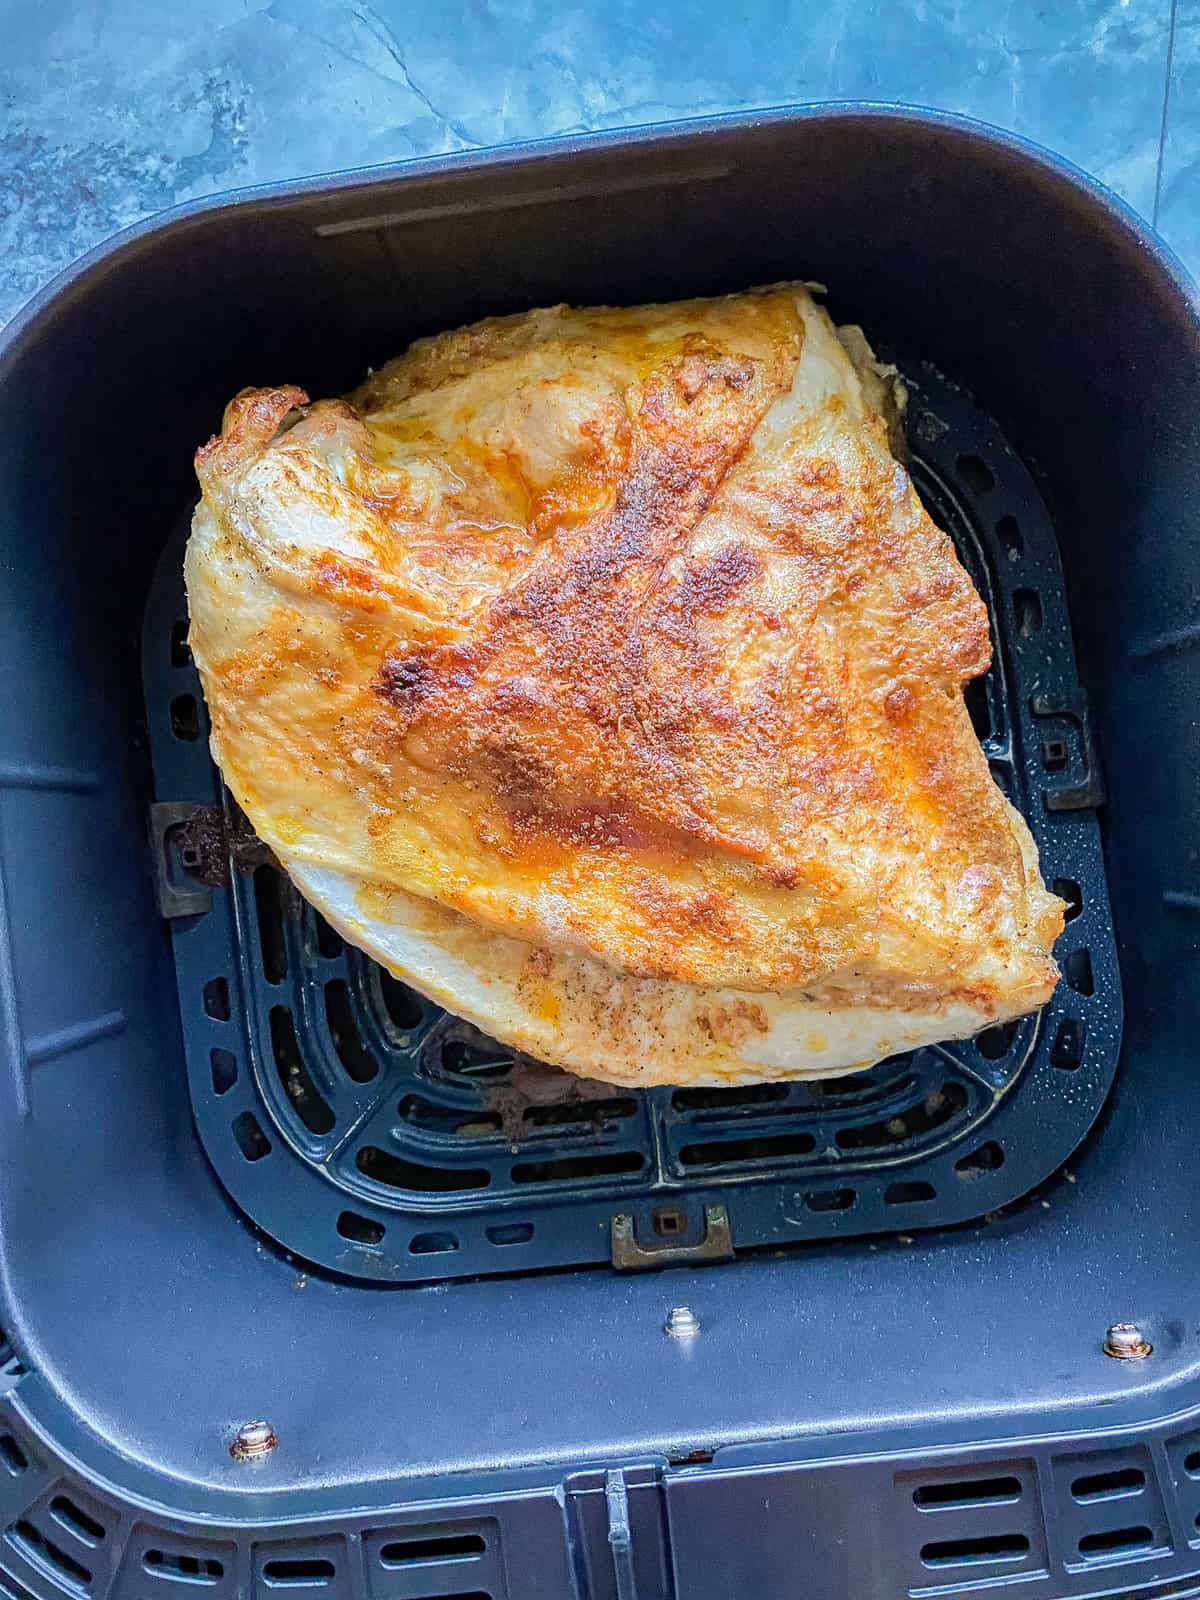 Black air fryer basket with a turkey that is half cooked in basket.